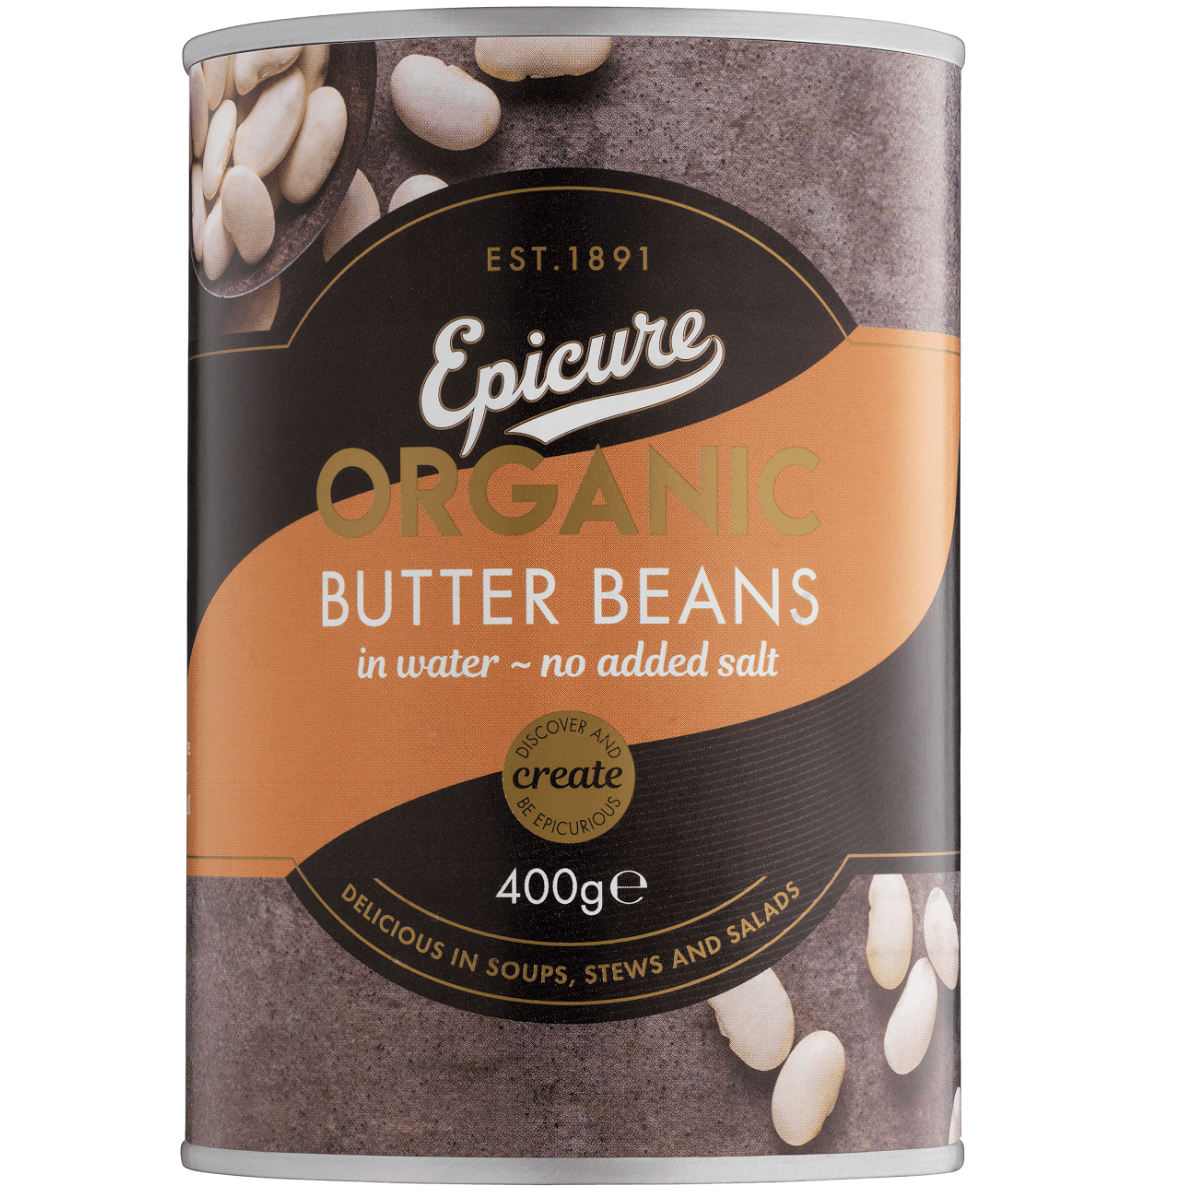 Epicure Organic Butter Beans in water no added salt 400g